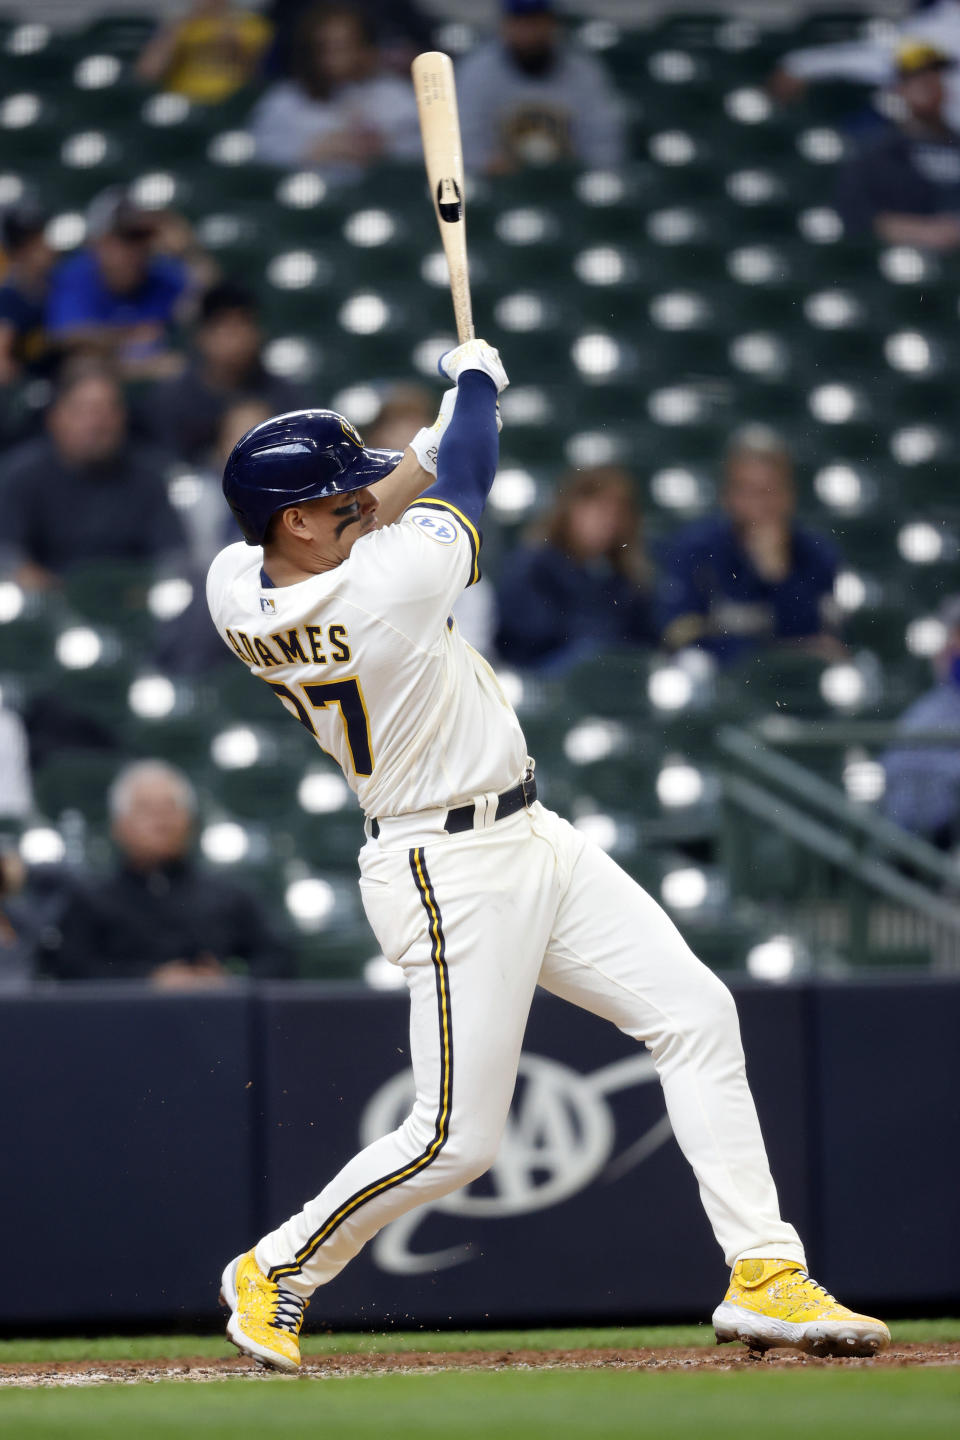 Milwaukee Brewers; Willy Adames hits an RBI single during the fifth inning of a baseball game against the San Diego Padres, Thursday, May 27, 2021, in Milwaukee. (AP Photo/Jeffrey Phelps)